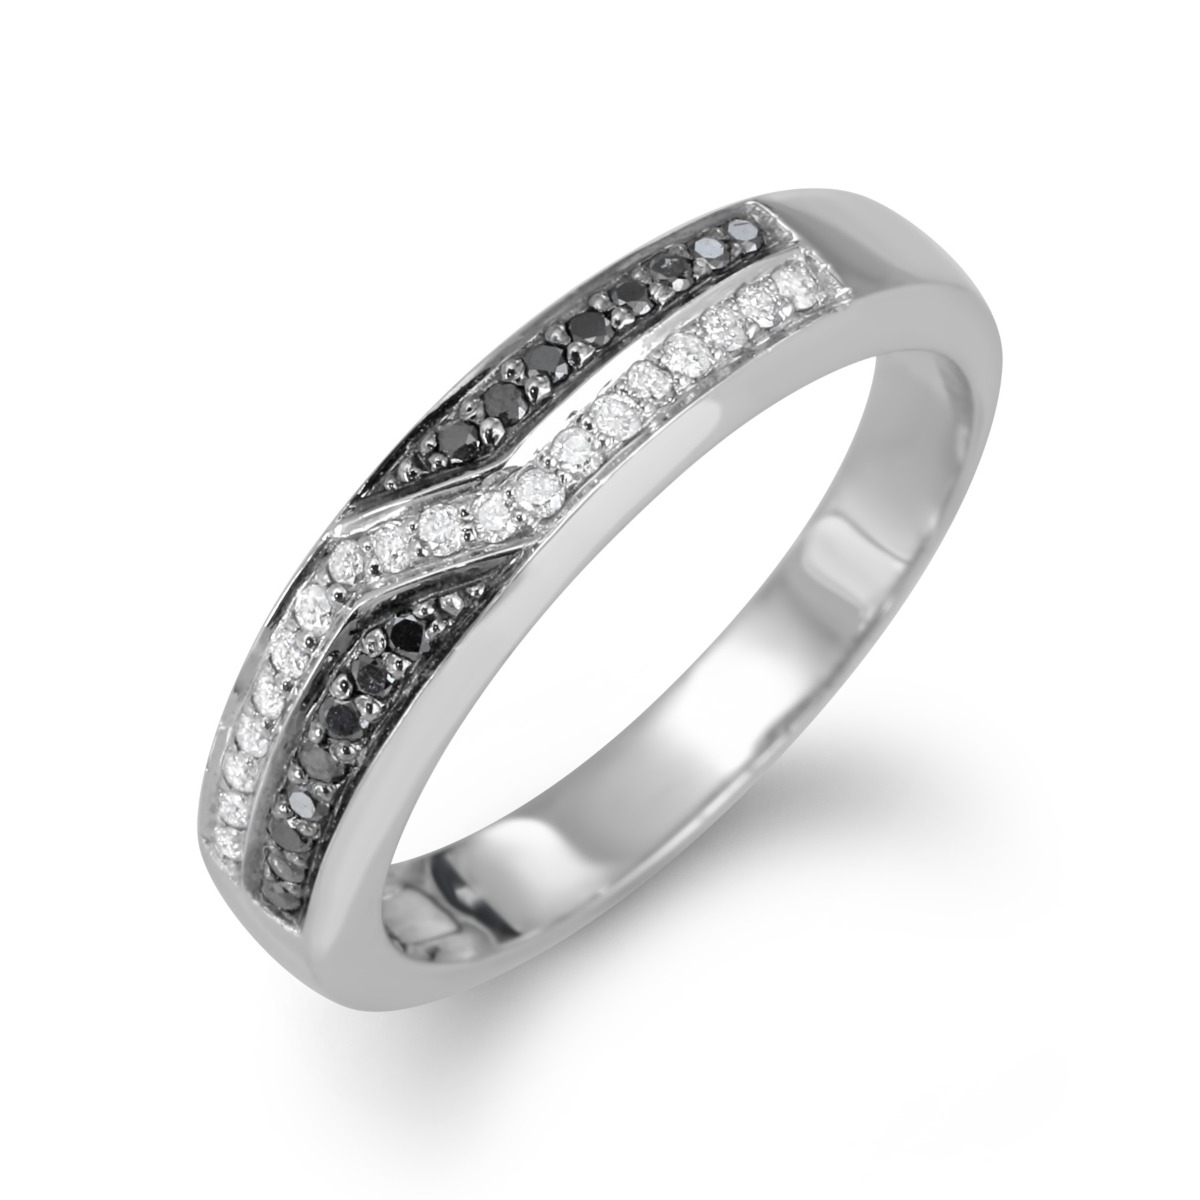 Anbinder 14K White Gold Anniversary Band with Black and White Diamond Cross-Over Design - 1